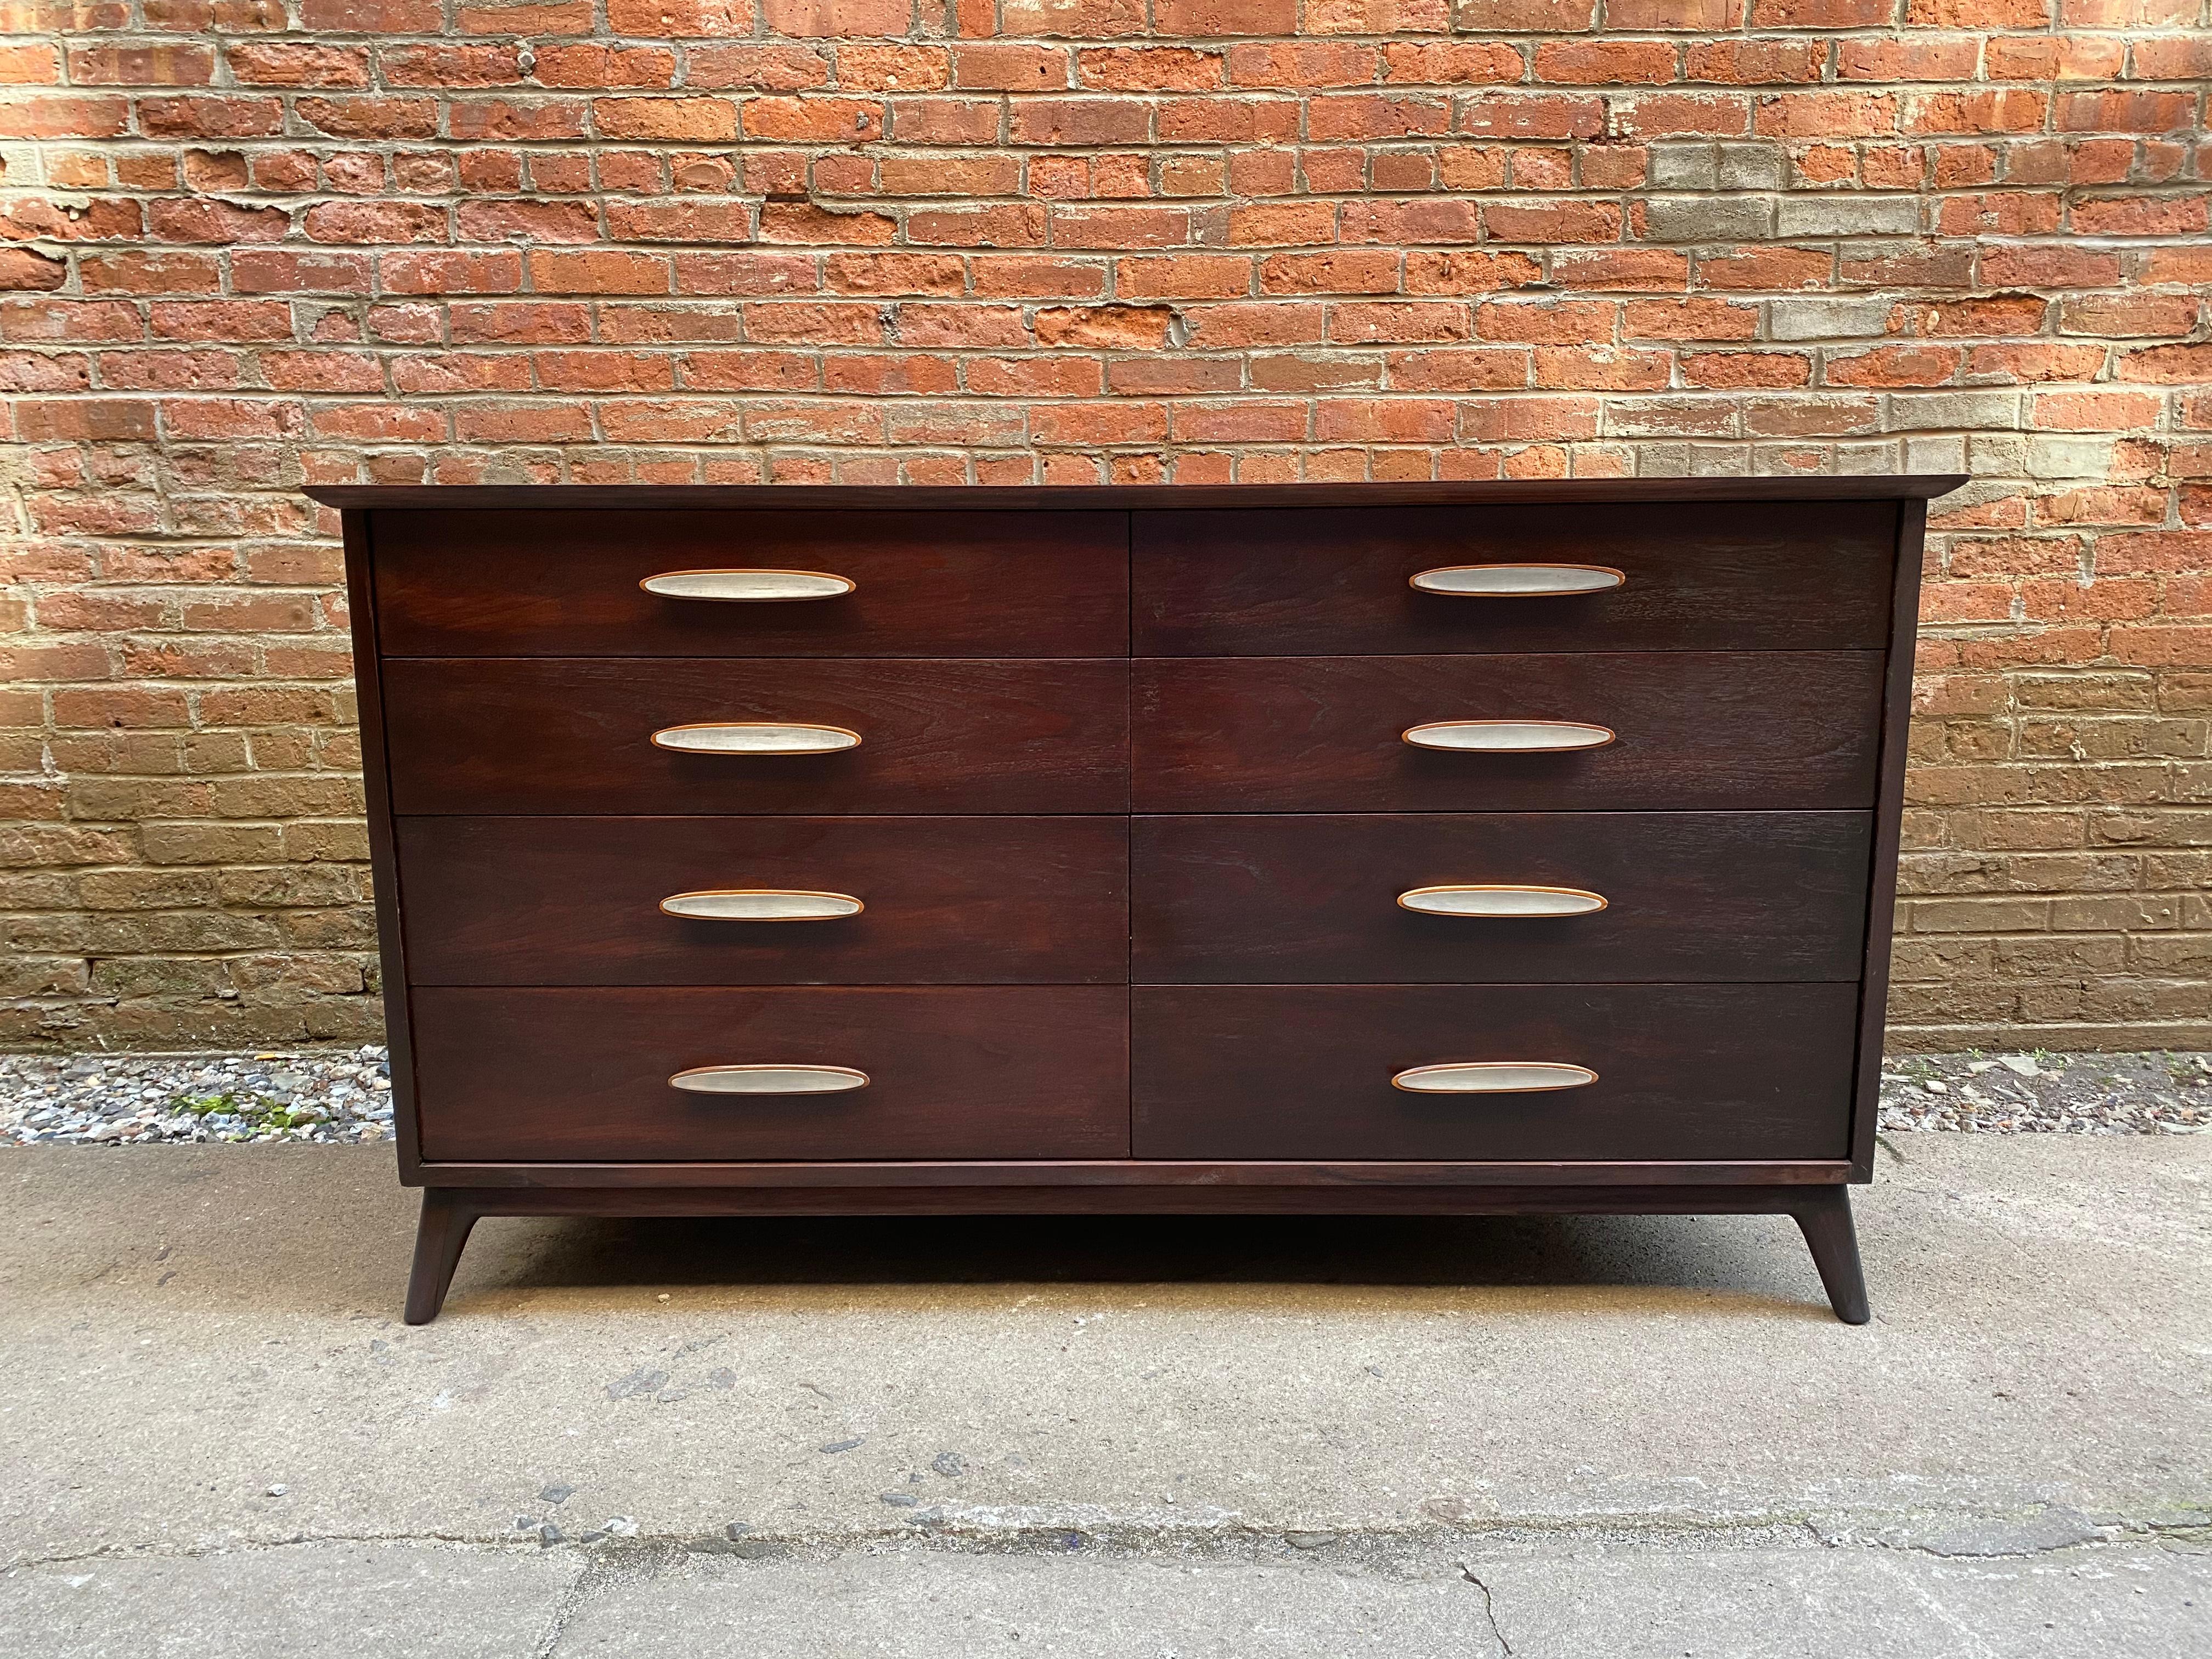 Mid-Century Modern mahogany eight drawer dresser for Heritage Henredon, circa 1960. Nicely figure mahogany veneers with solid walnut and aluminum pulls. Splayed legs, inlaid and beveled edge top. Good older refinish.

Measures: 20” deep x 60” wide